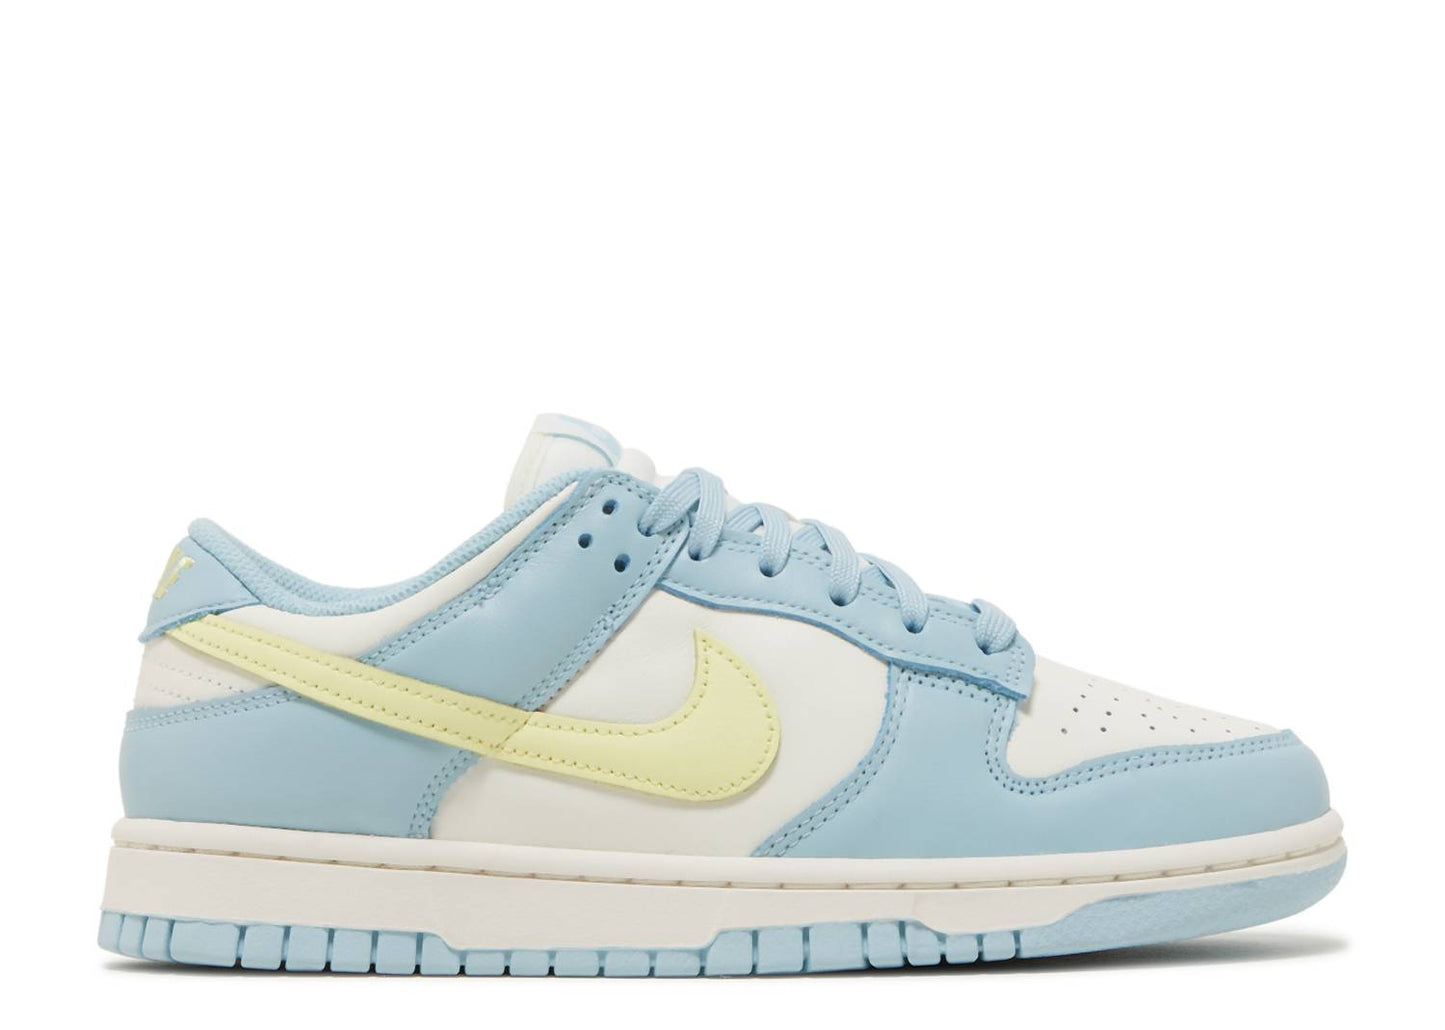 Nike Dunk Low Bliss (WMNS)